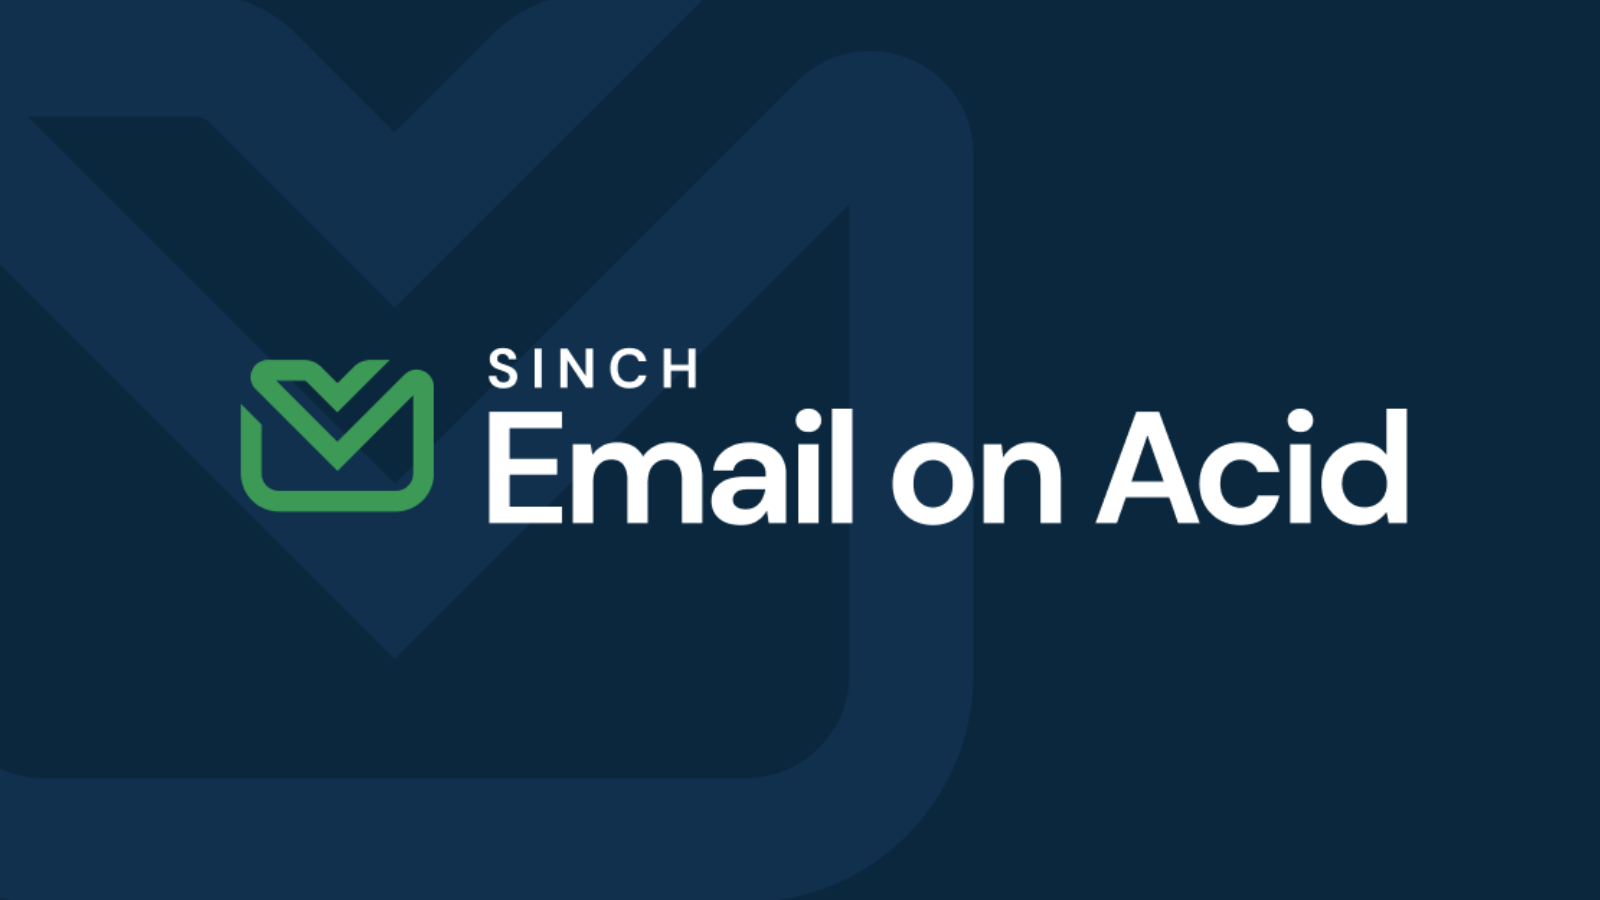 Sinch Email on Acid logo - green envelope with checkmark